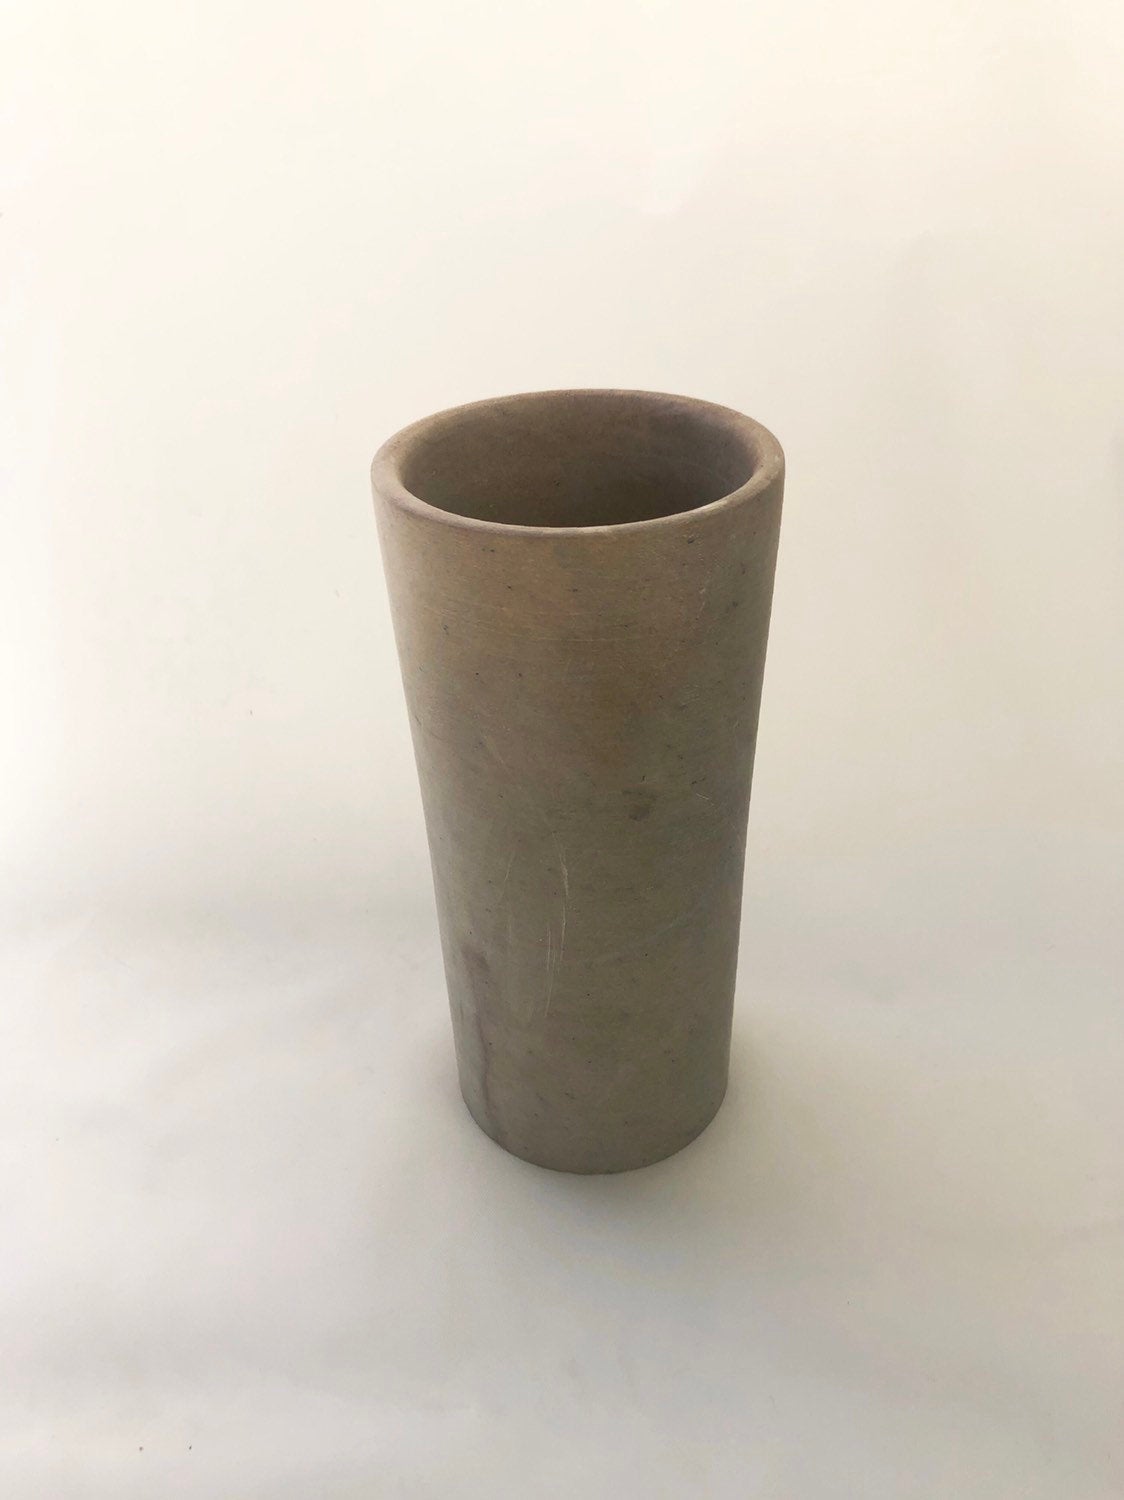 Soapstone Drinking Cup - Gian Carlo Artistic Stone